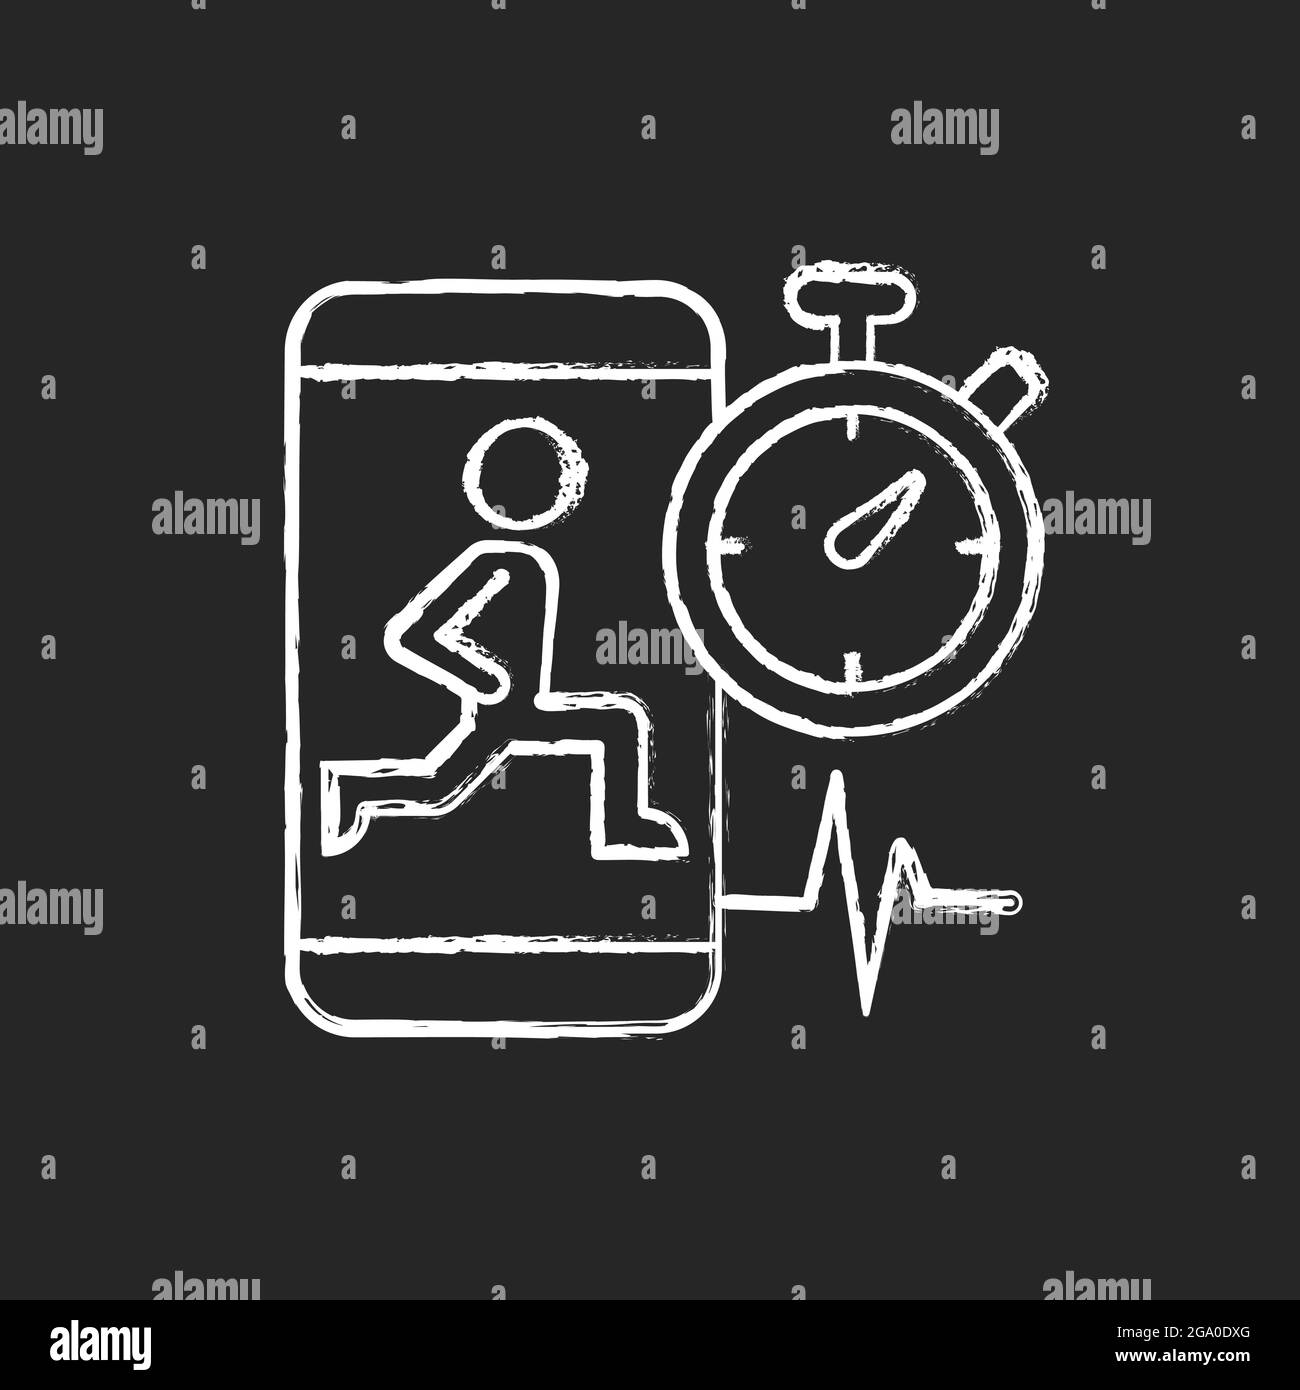 High intensity and intervals workout chalk white icon on dark background. Stock Vector